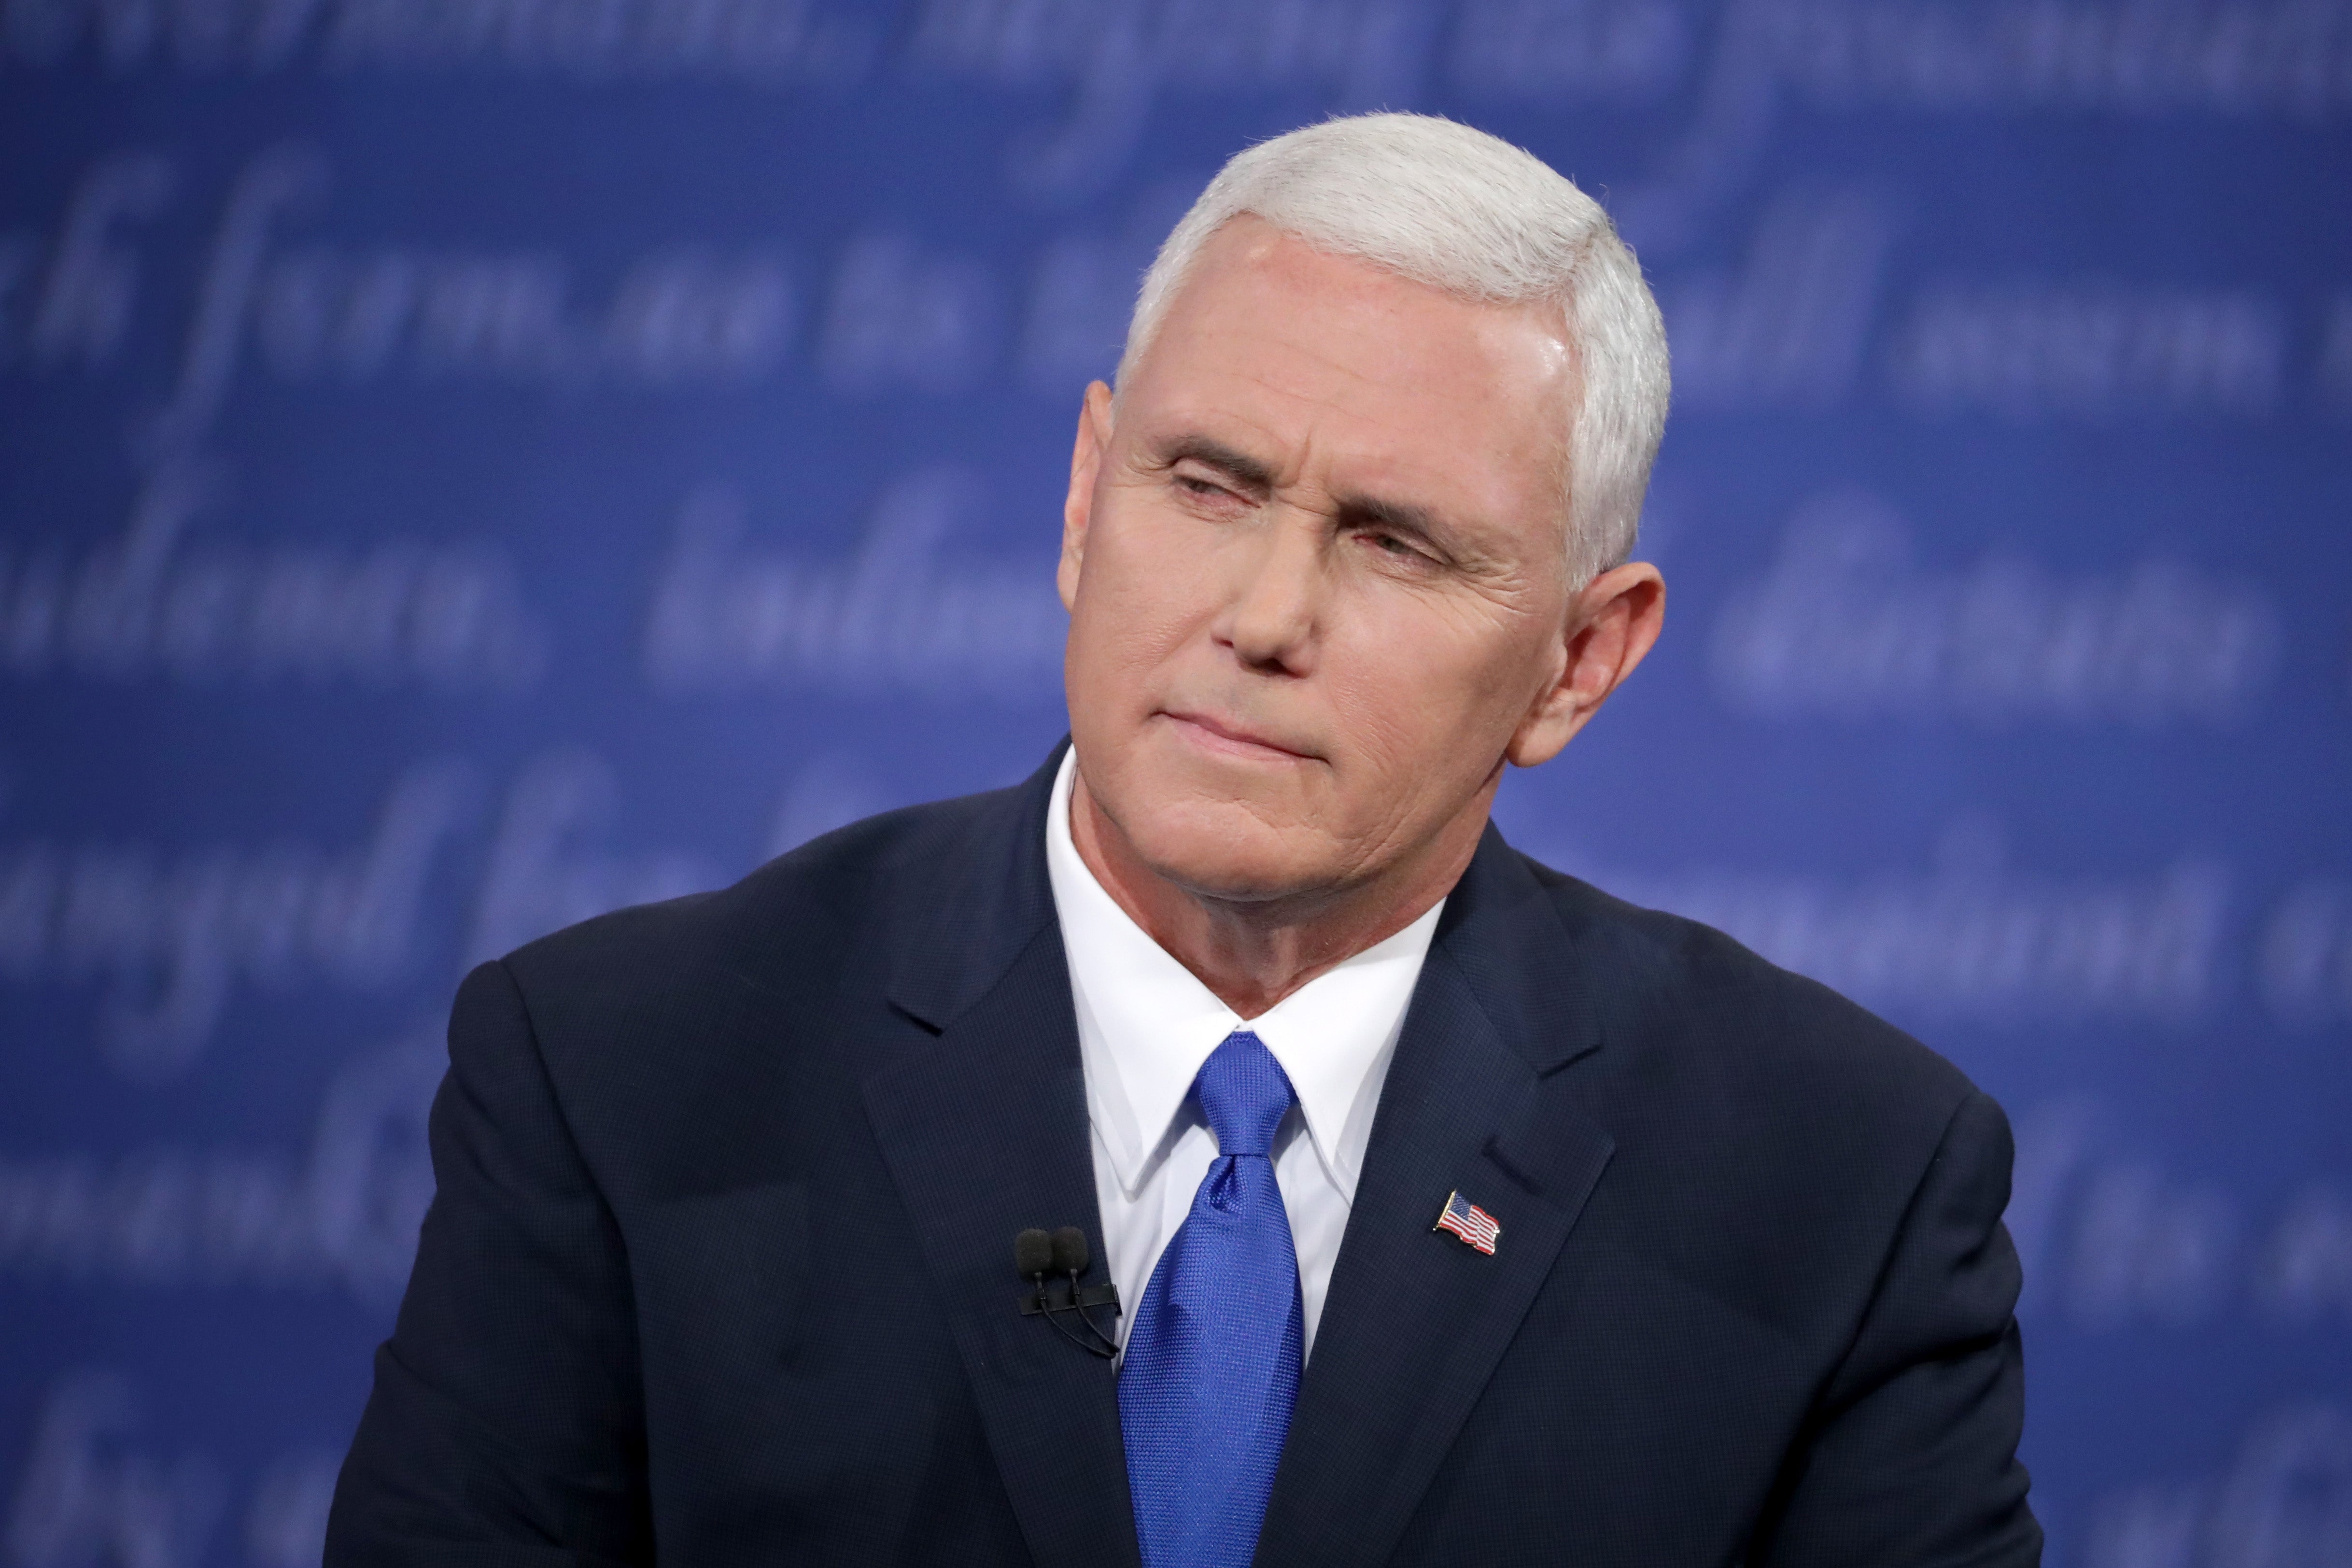 Planned Parenthood Received 20,000 Donations in Mike Pence’s Name
